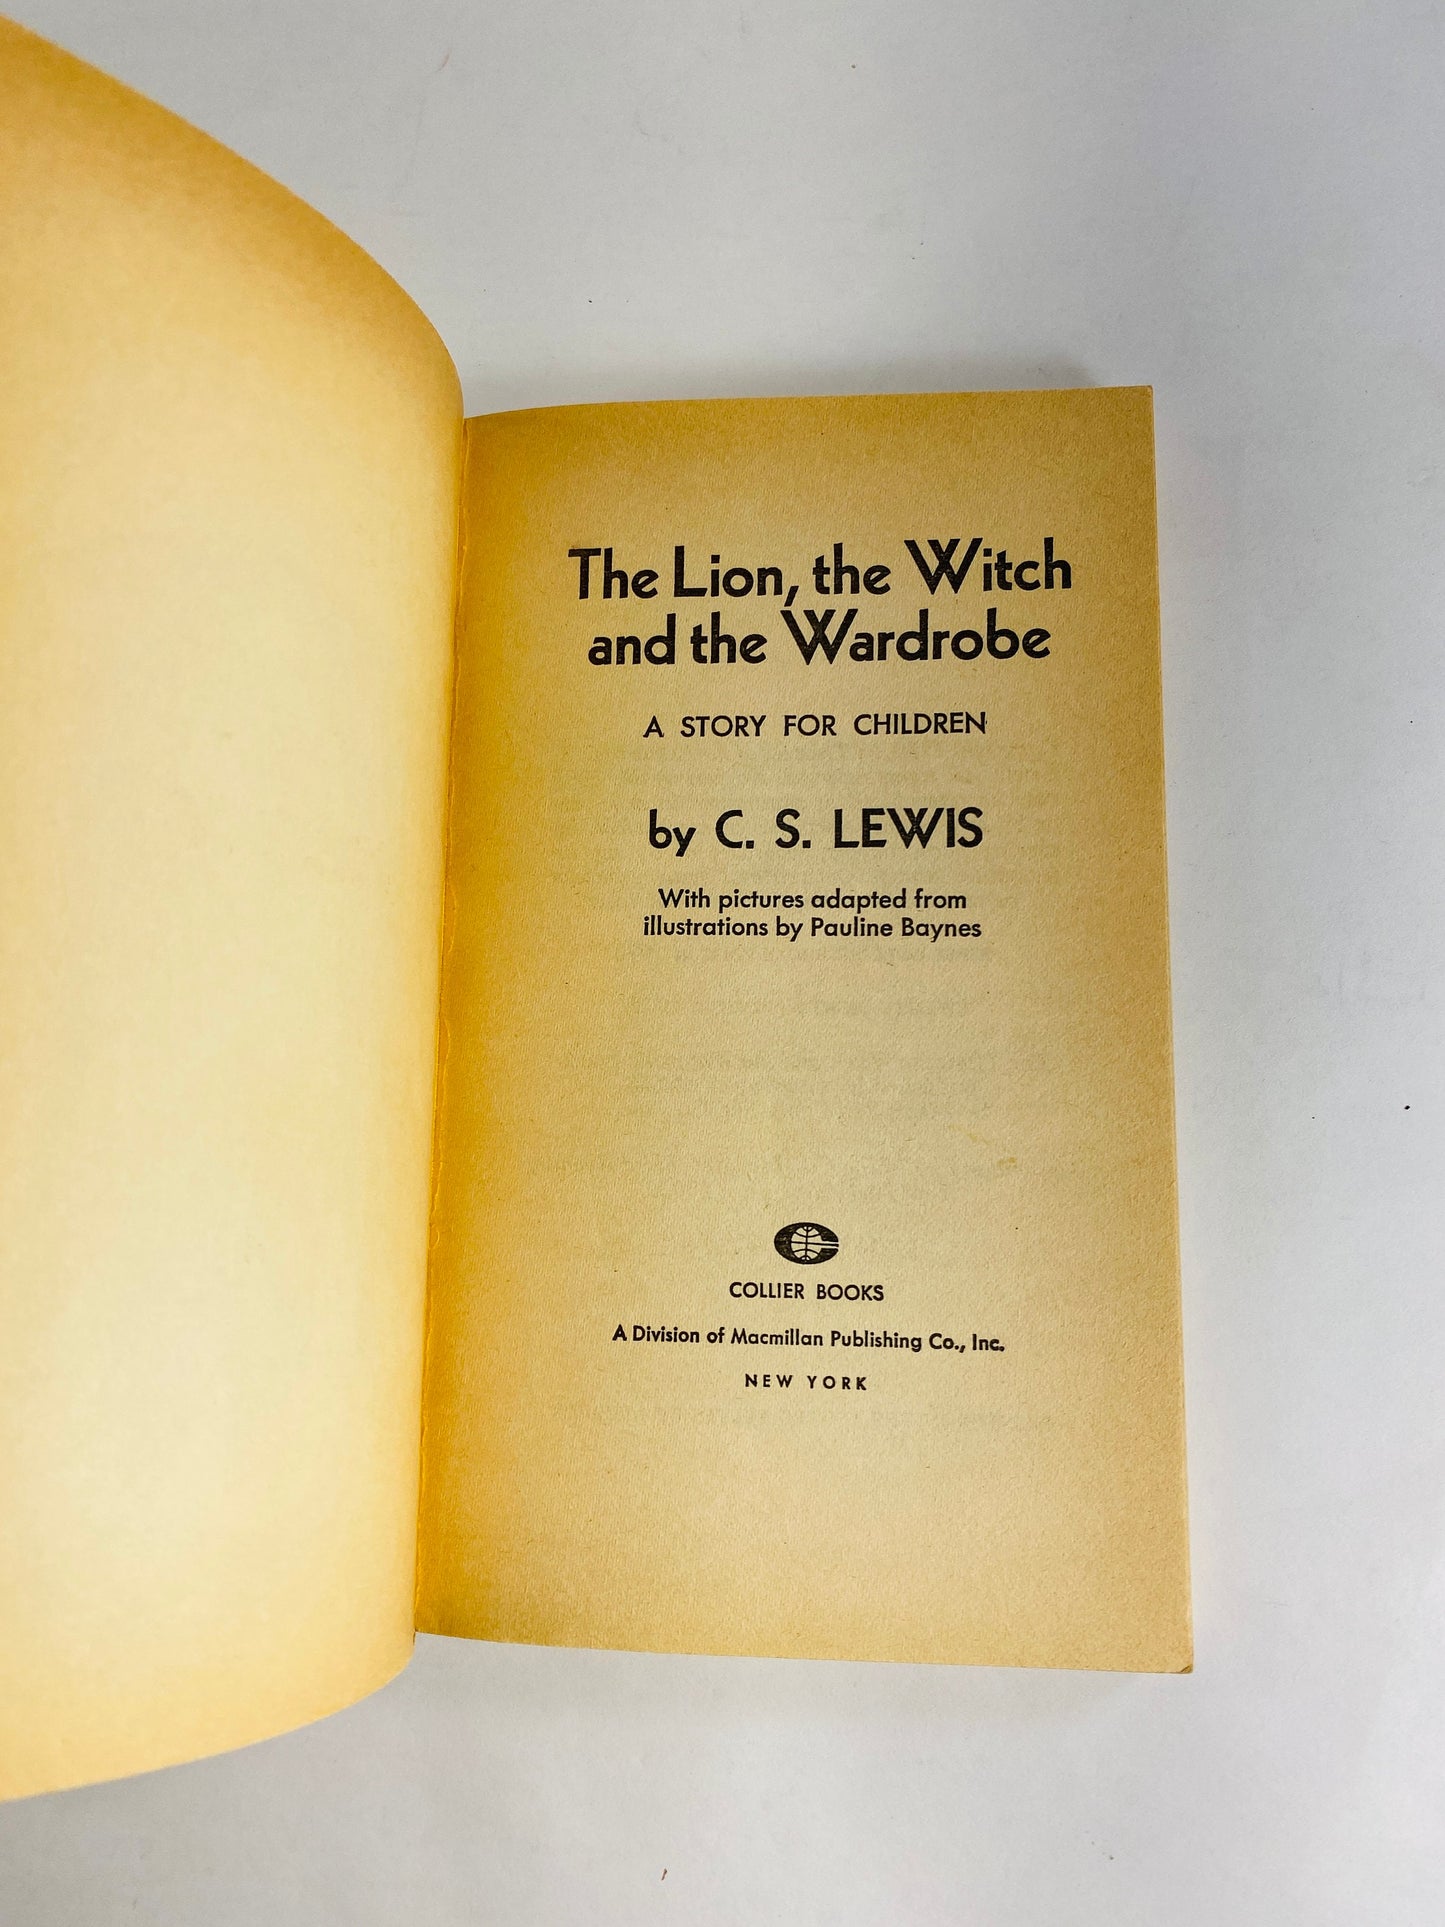 Chronicles of Narnia by CS Lewis Lion, the Witch and the Wardrobe vintage paperback book circa 1979 science fiction Fantasy